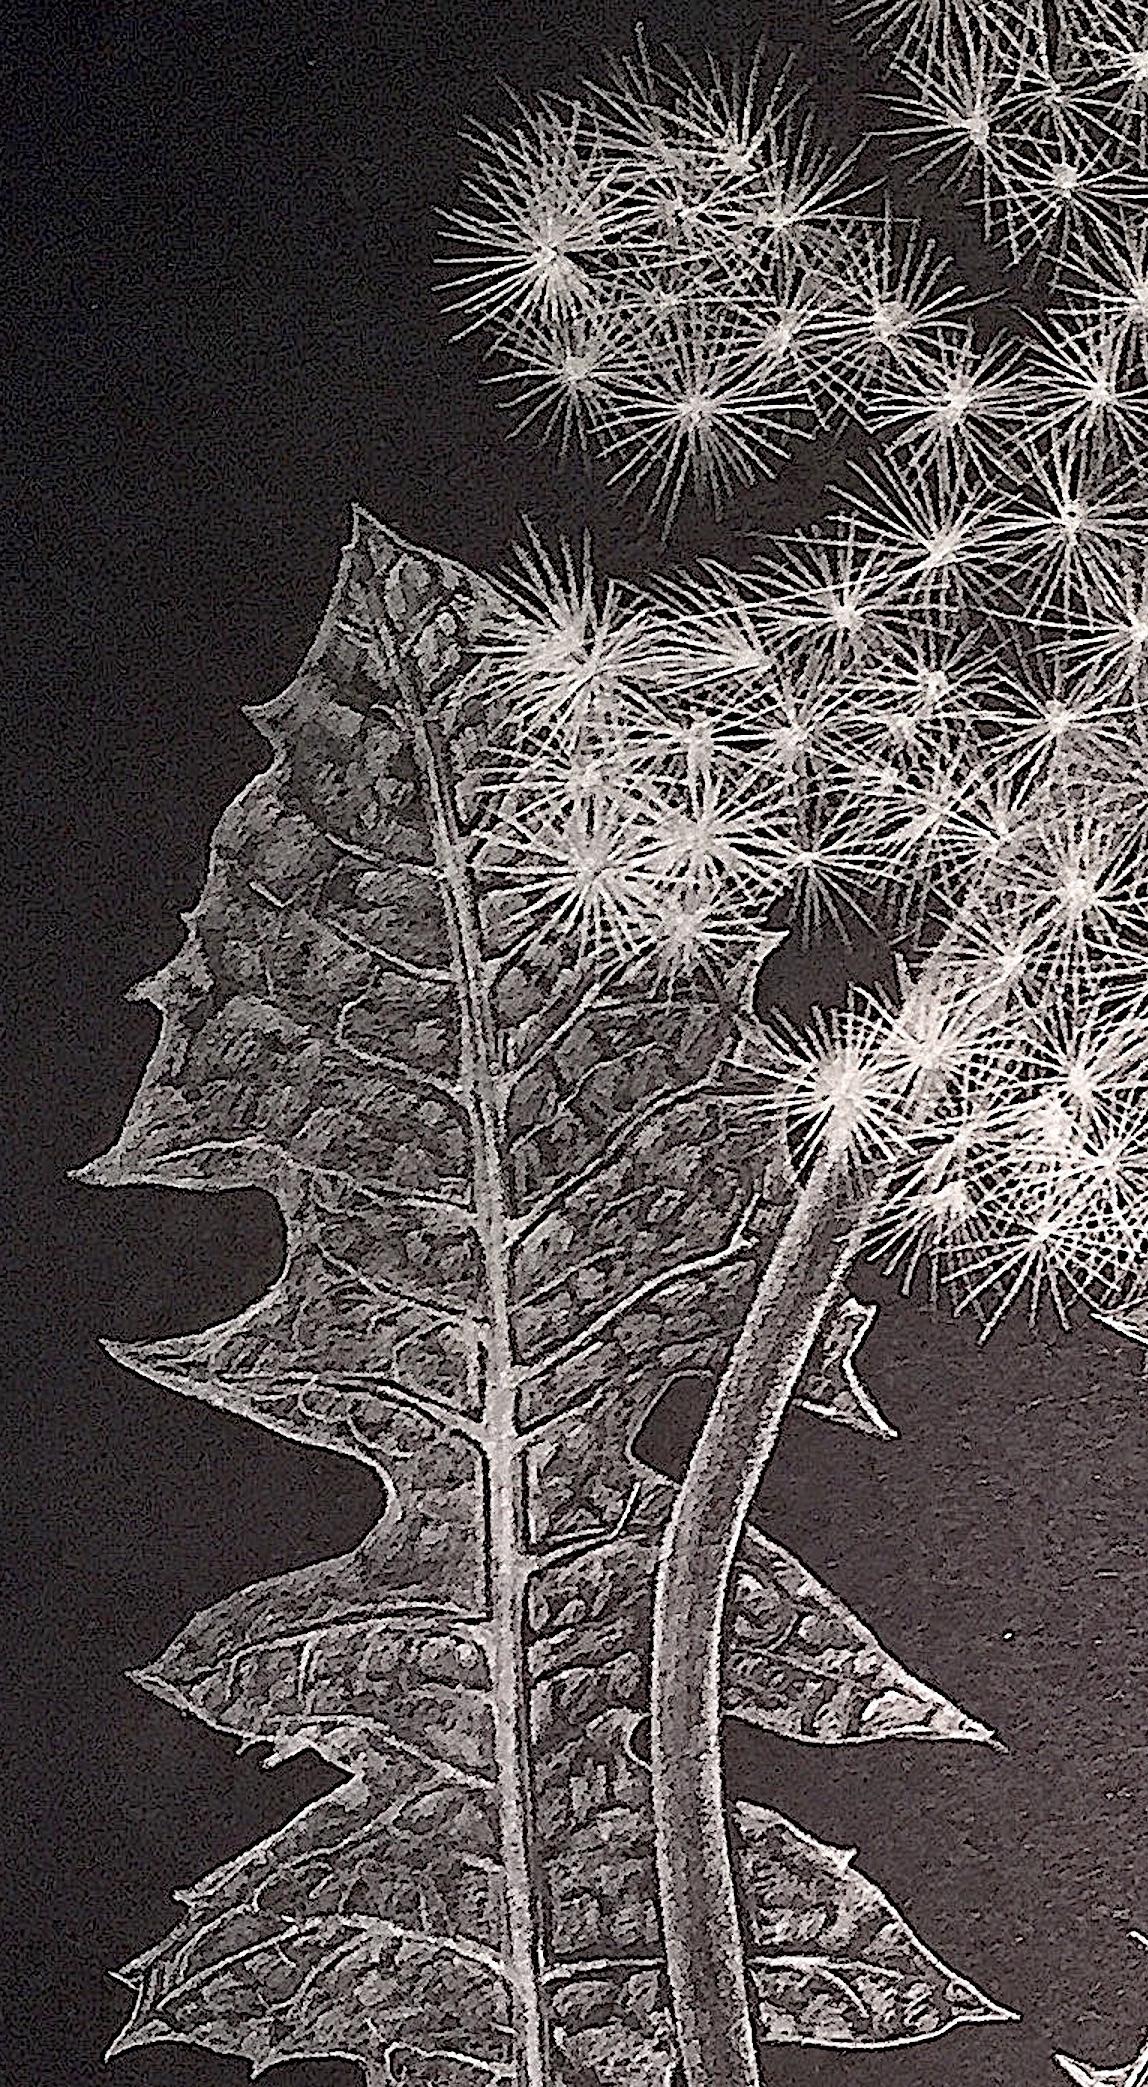 Margot Glass, Dandelion with Buds, graphite on paper realist still life drawing 1